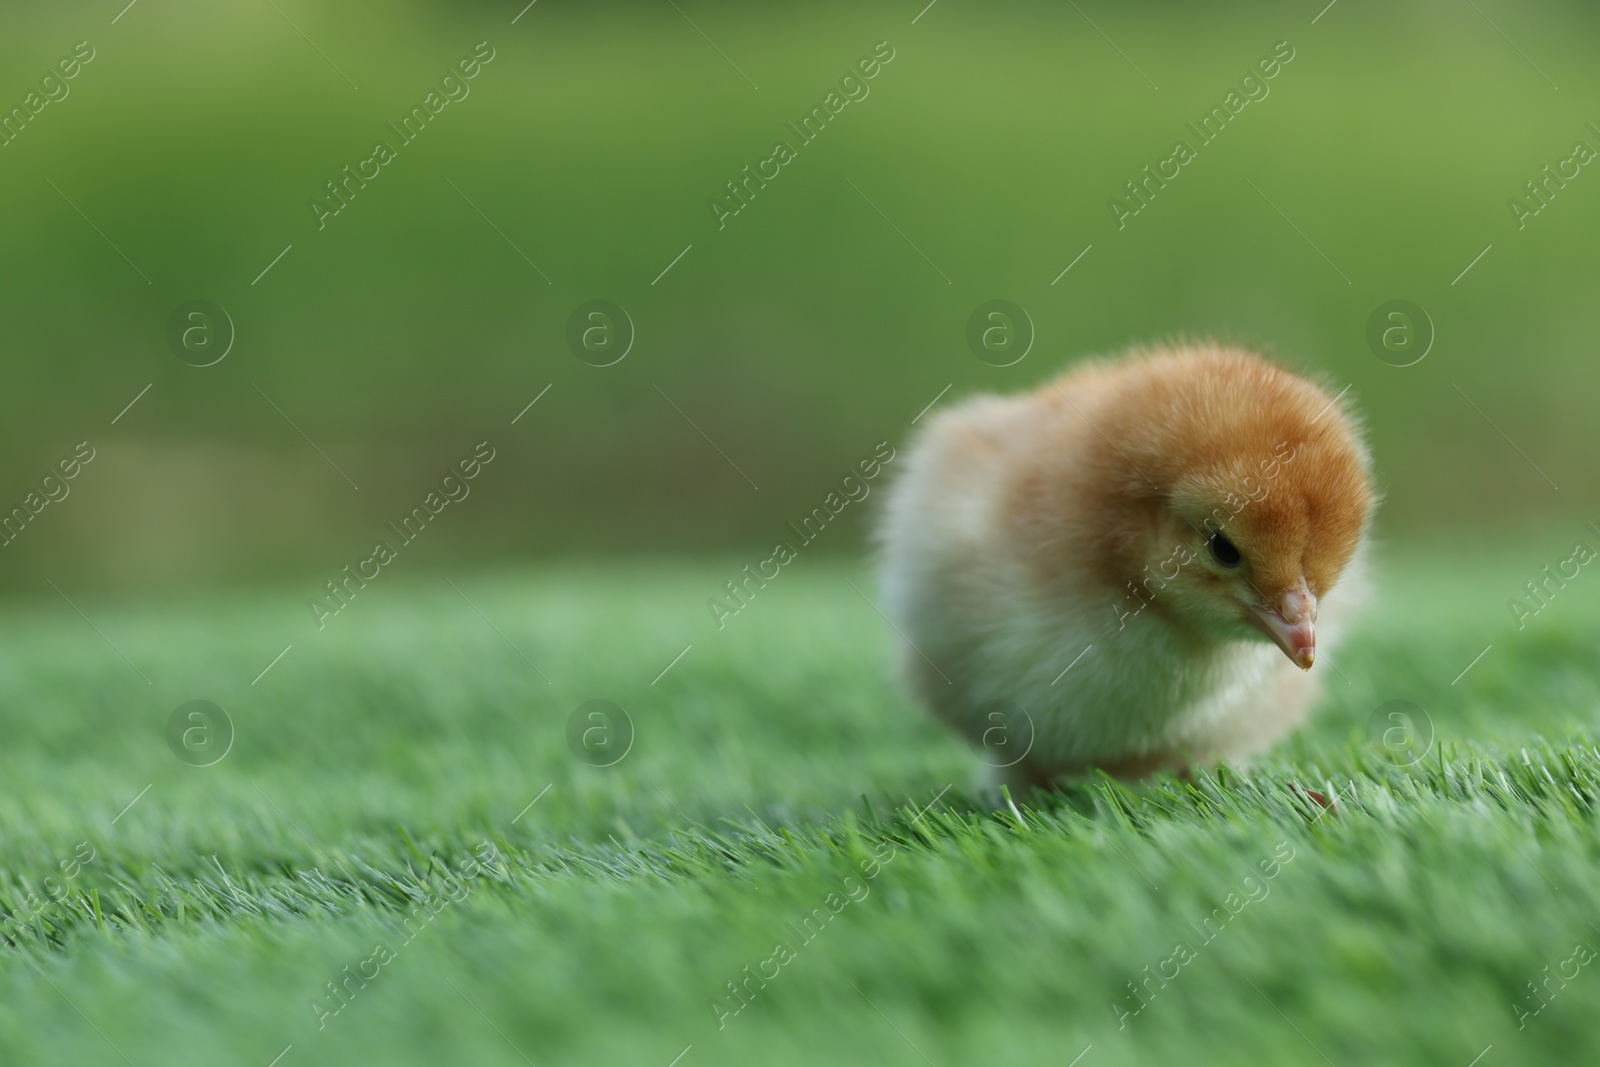 Photo of Cute chick on green artificial grass outdoors, closeup with space for text. Baby animal